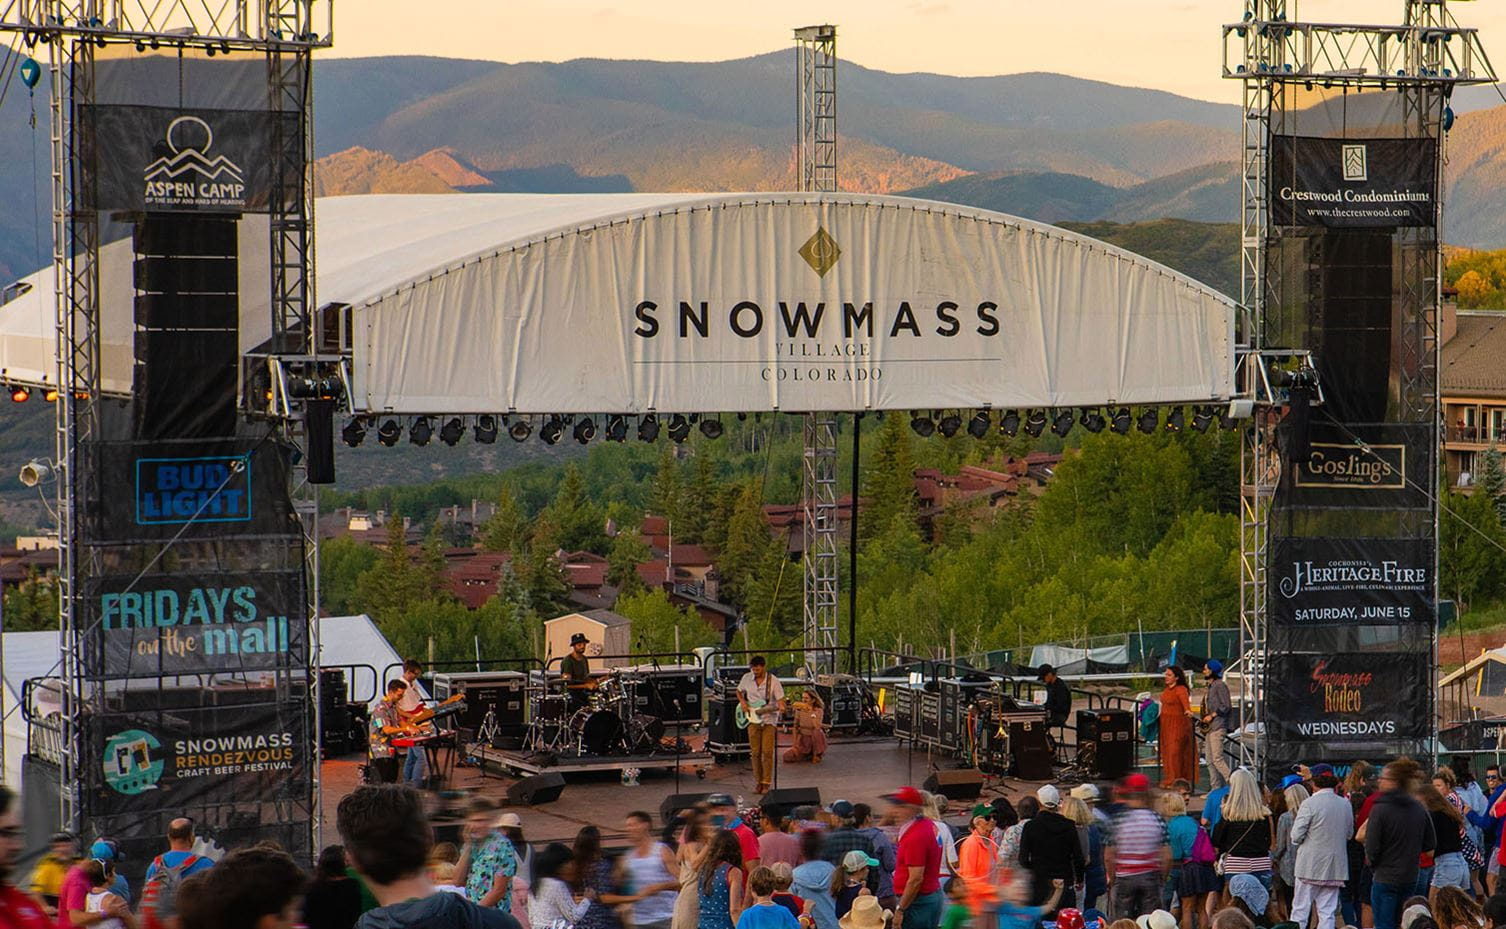 Weekly concert series in Snowmass.